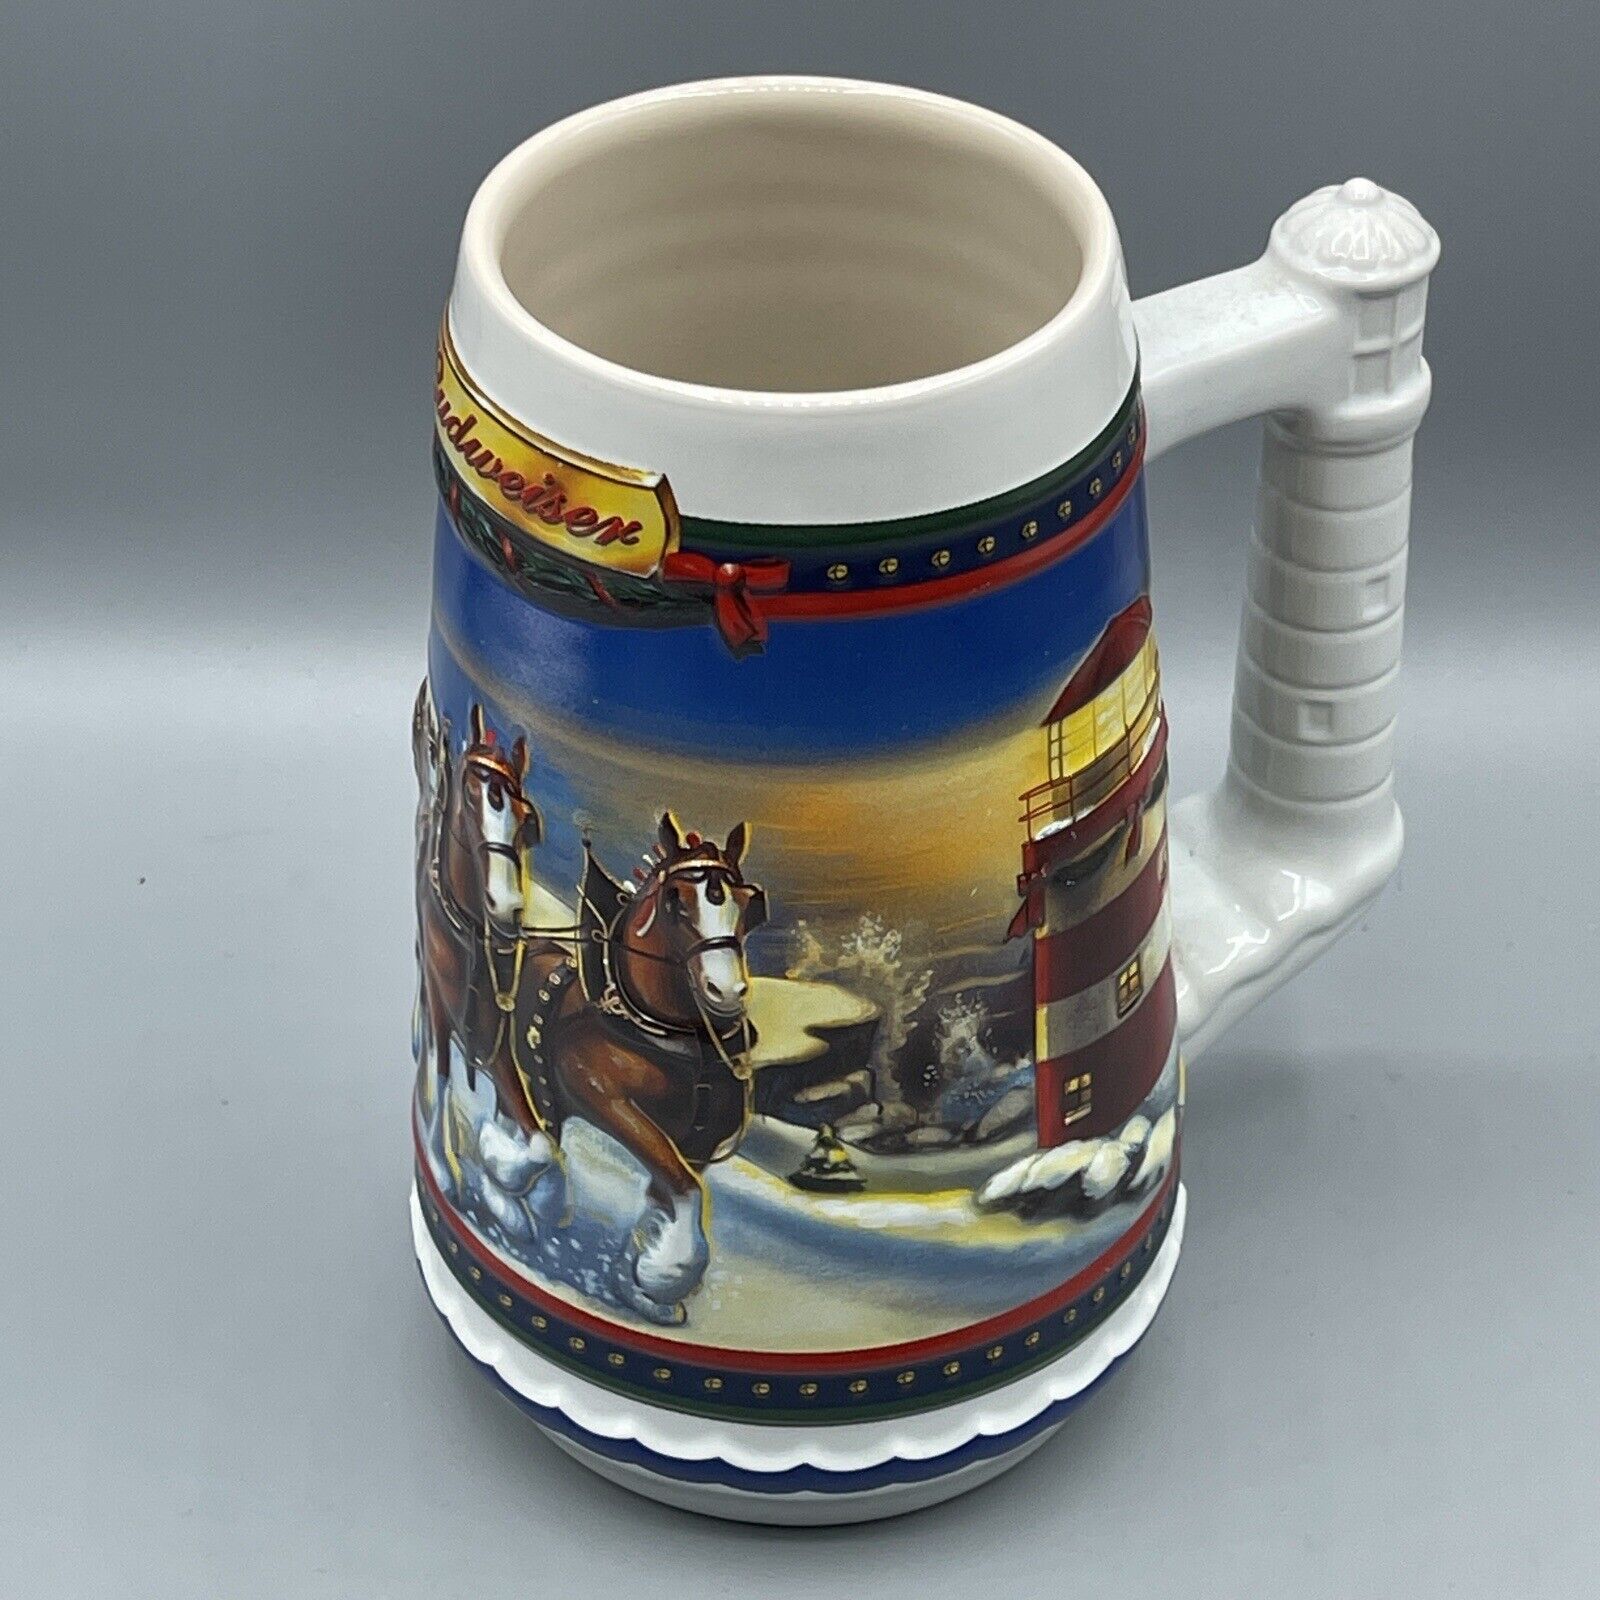 Vintage Budweiser Stein Beer 2002 Guiding the Way Home Lighthouse Christmas